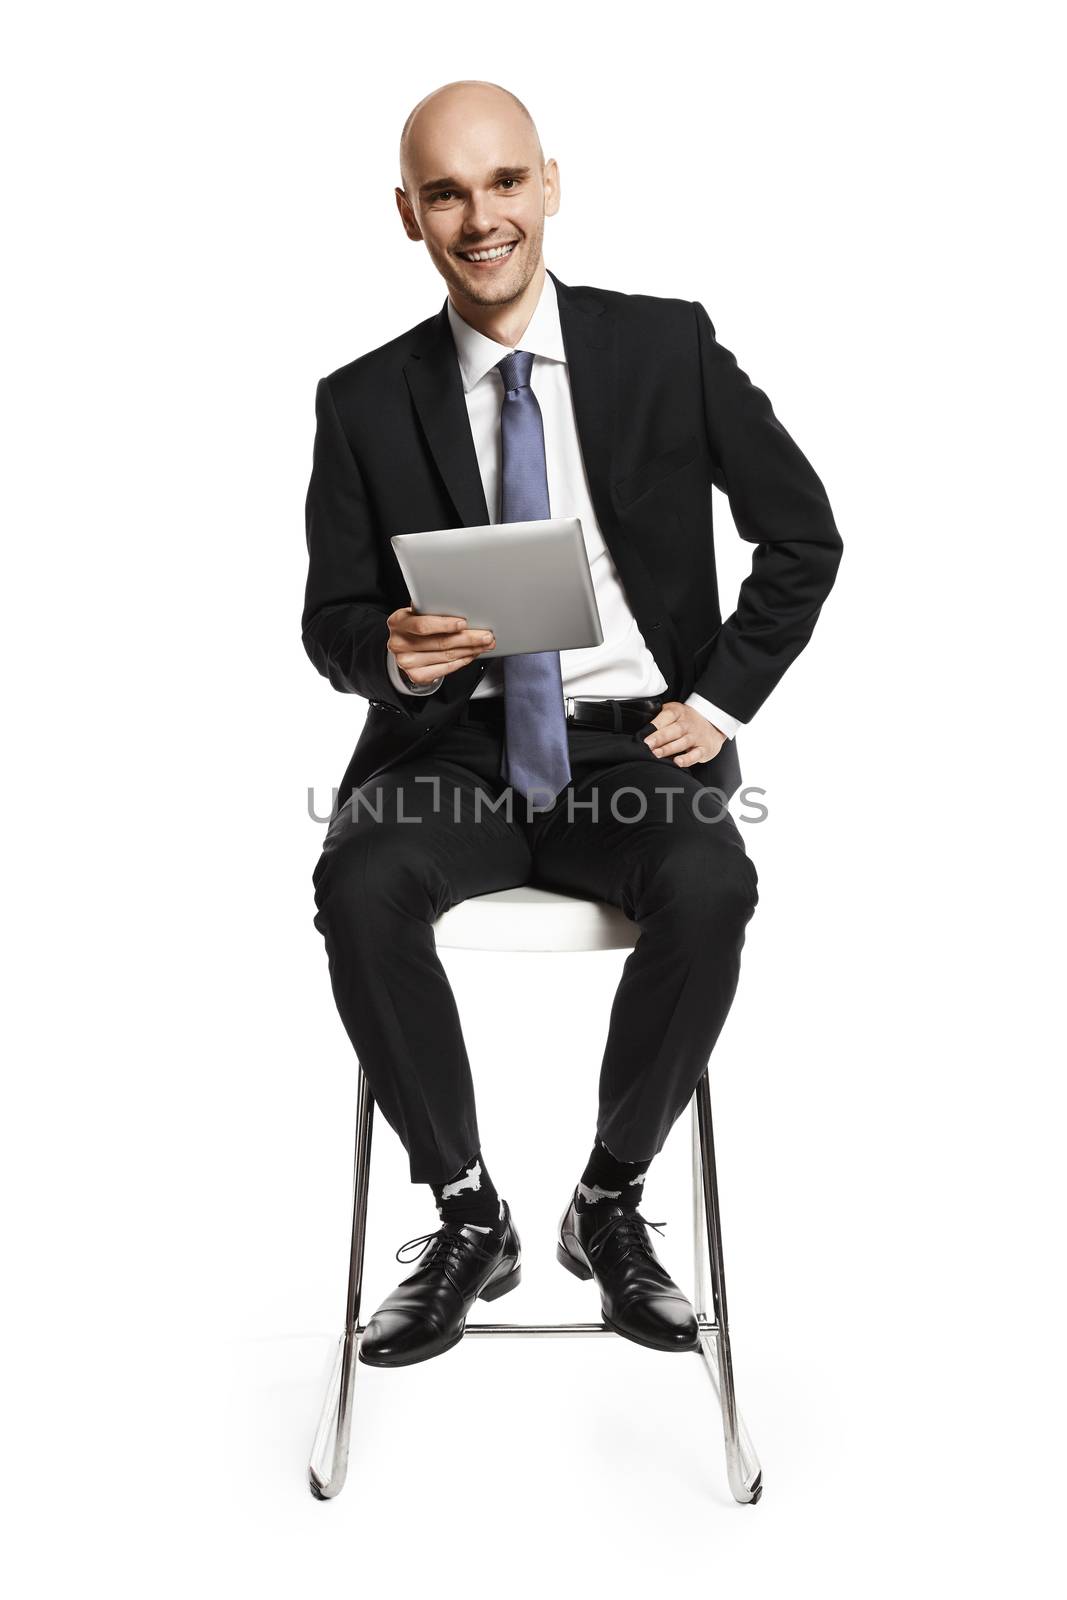 Cheerful young businessman sitting on a chair with a digital tablet. Isolated on white background.